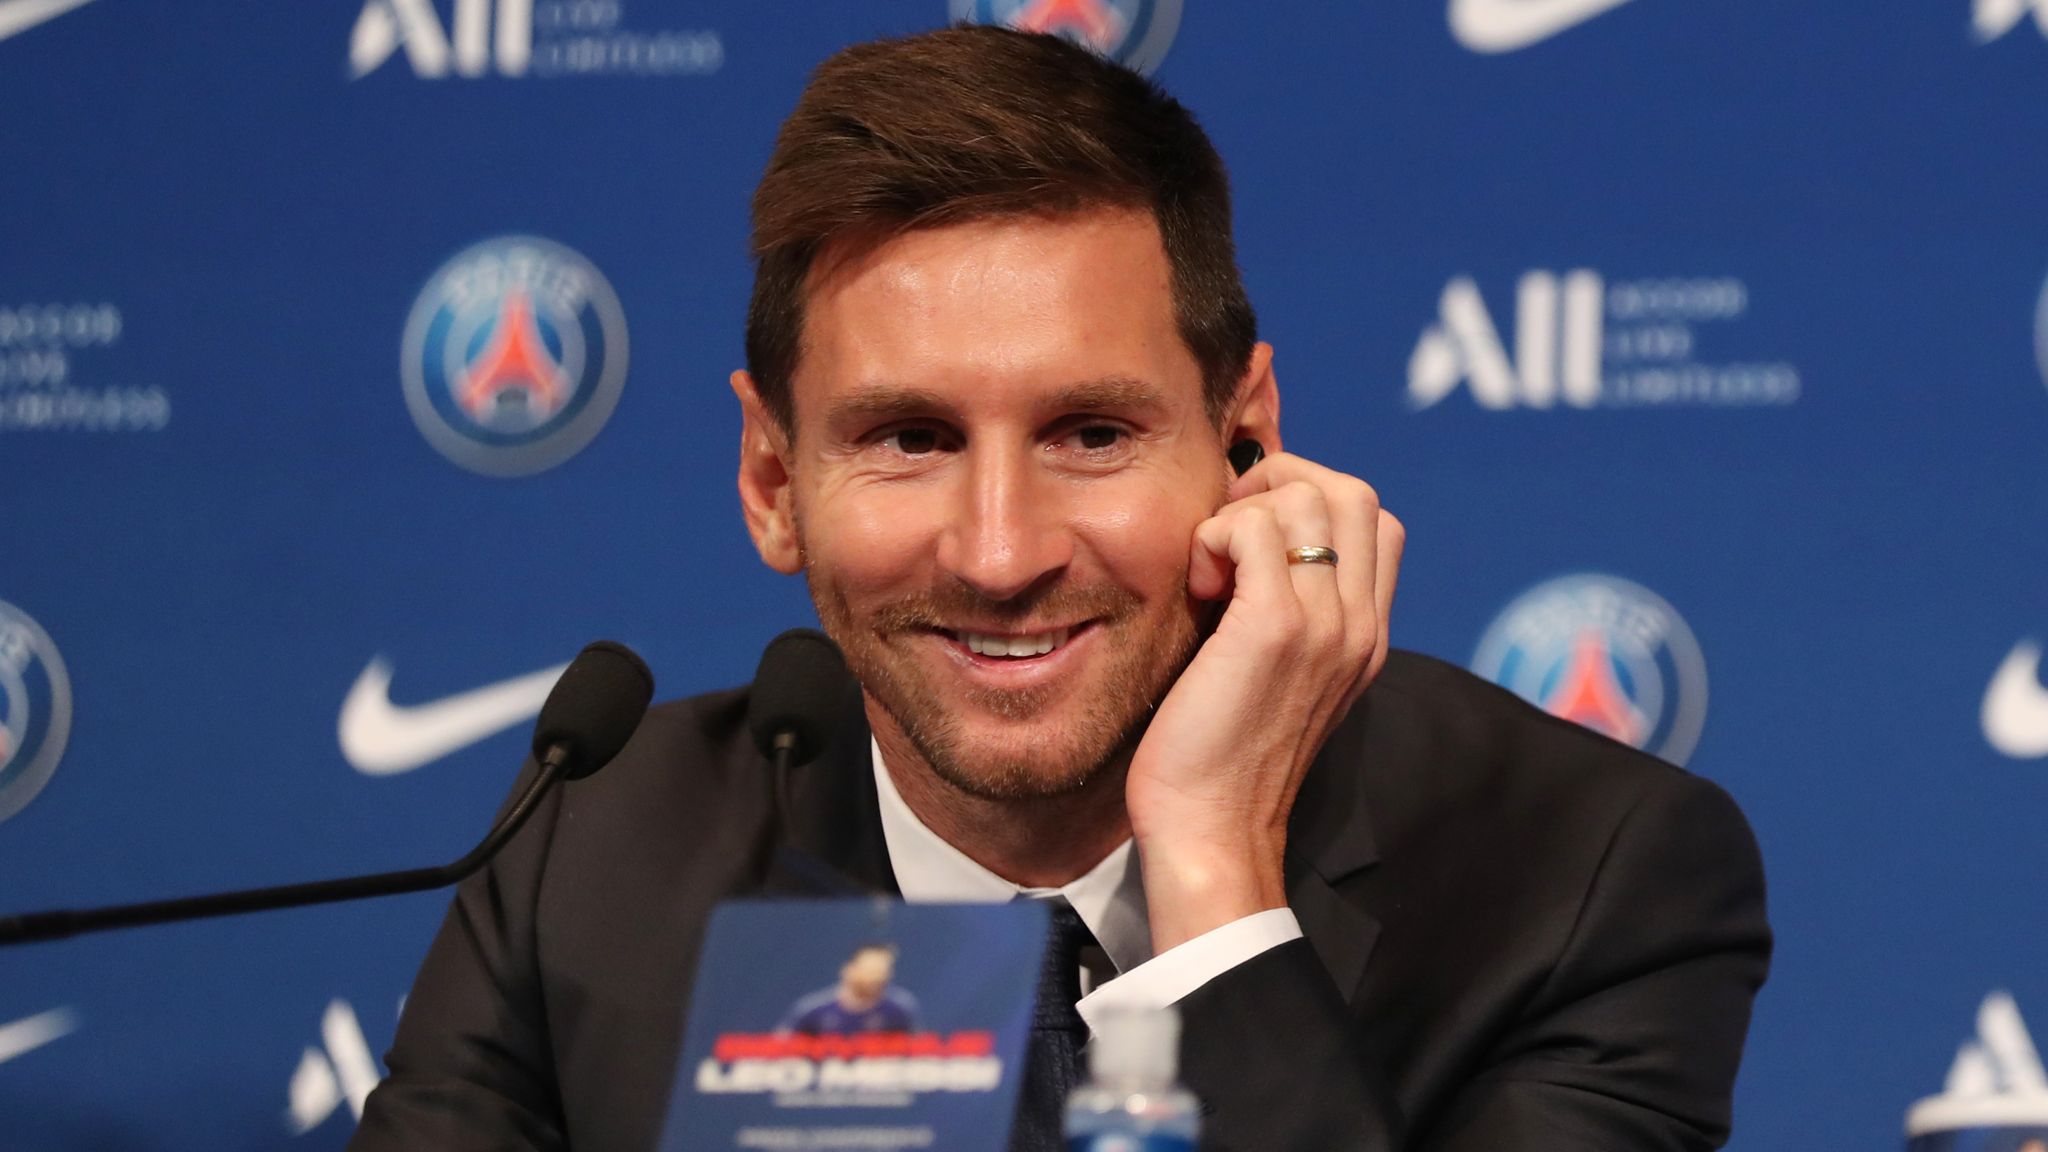 Messi's welcome package at PSG includes cryptocurrency fan tokens